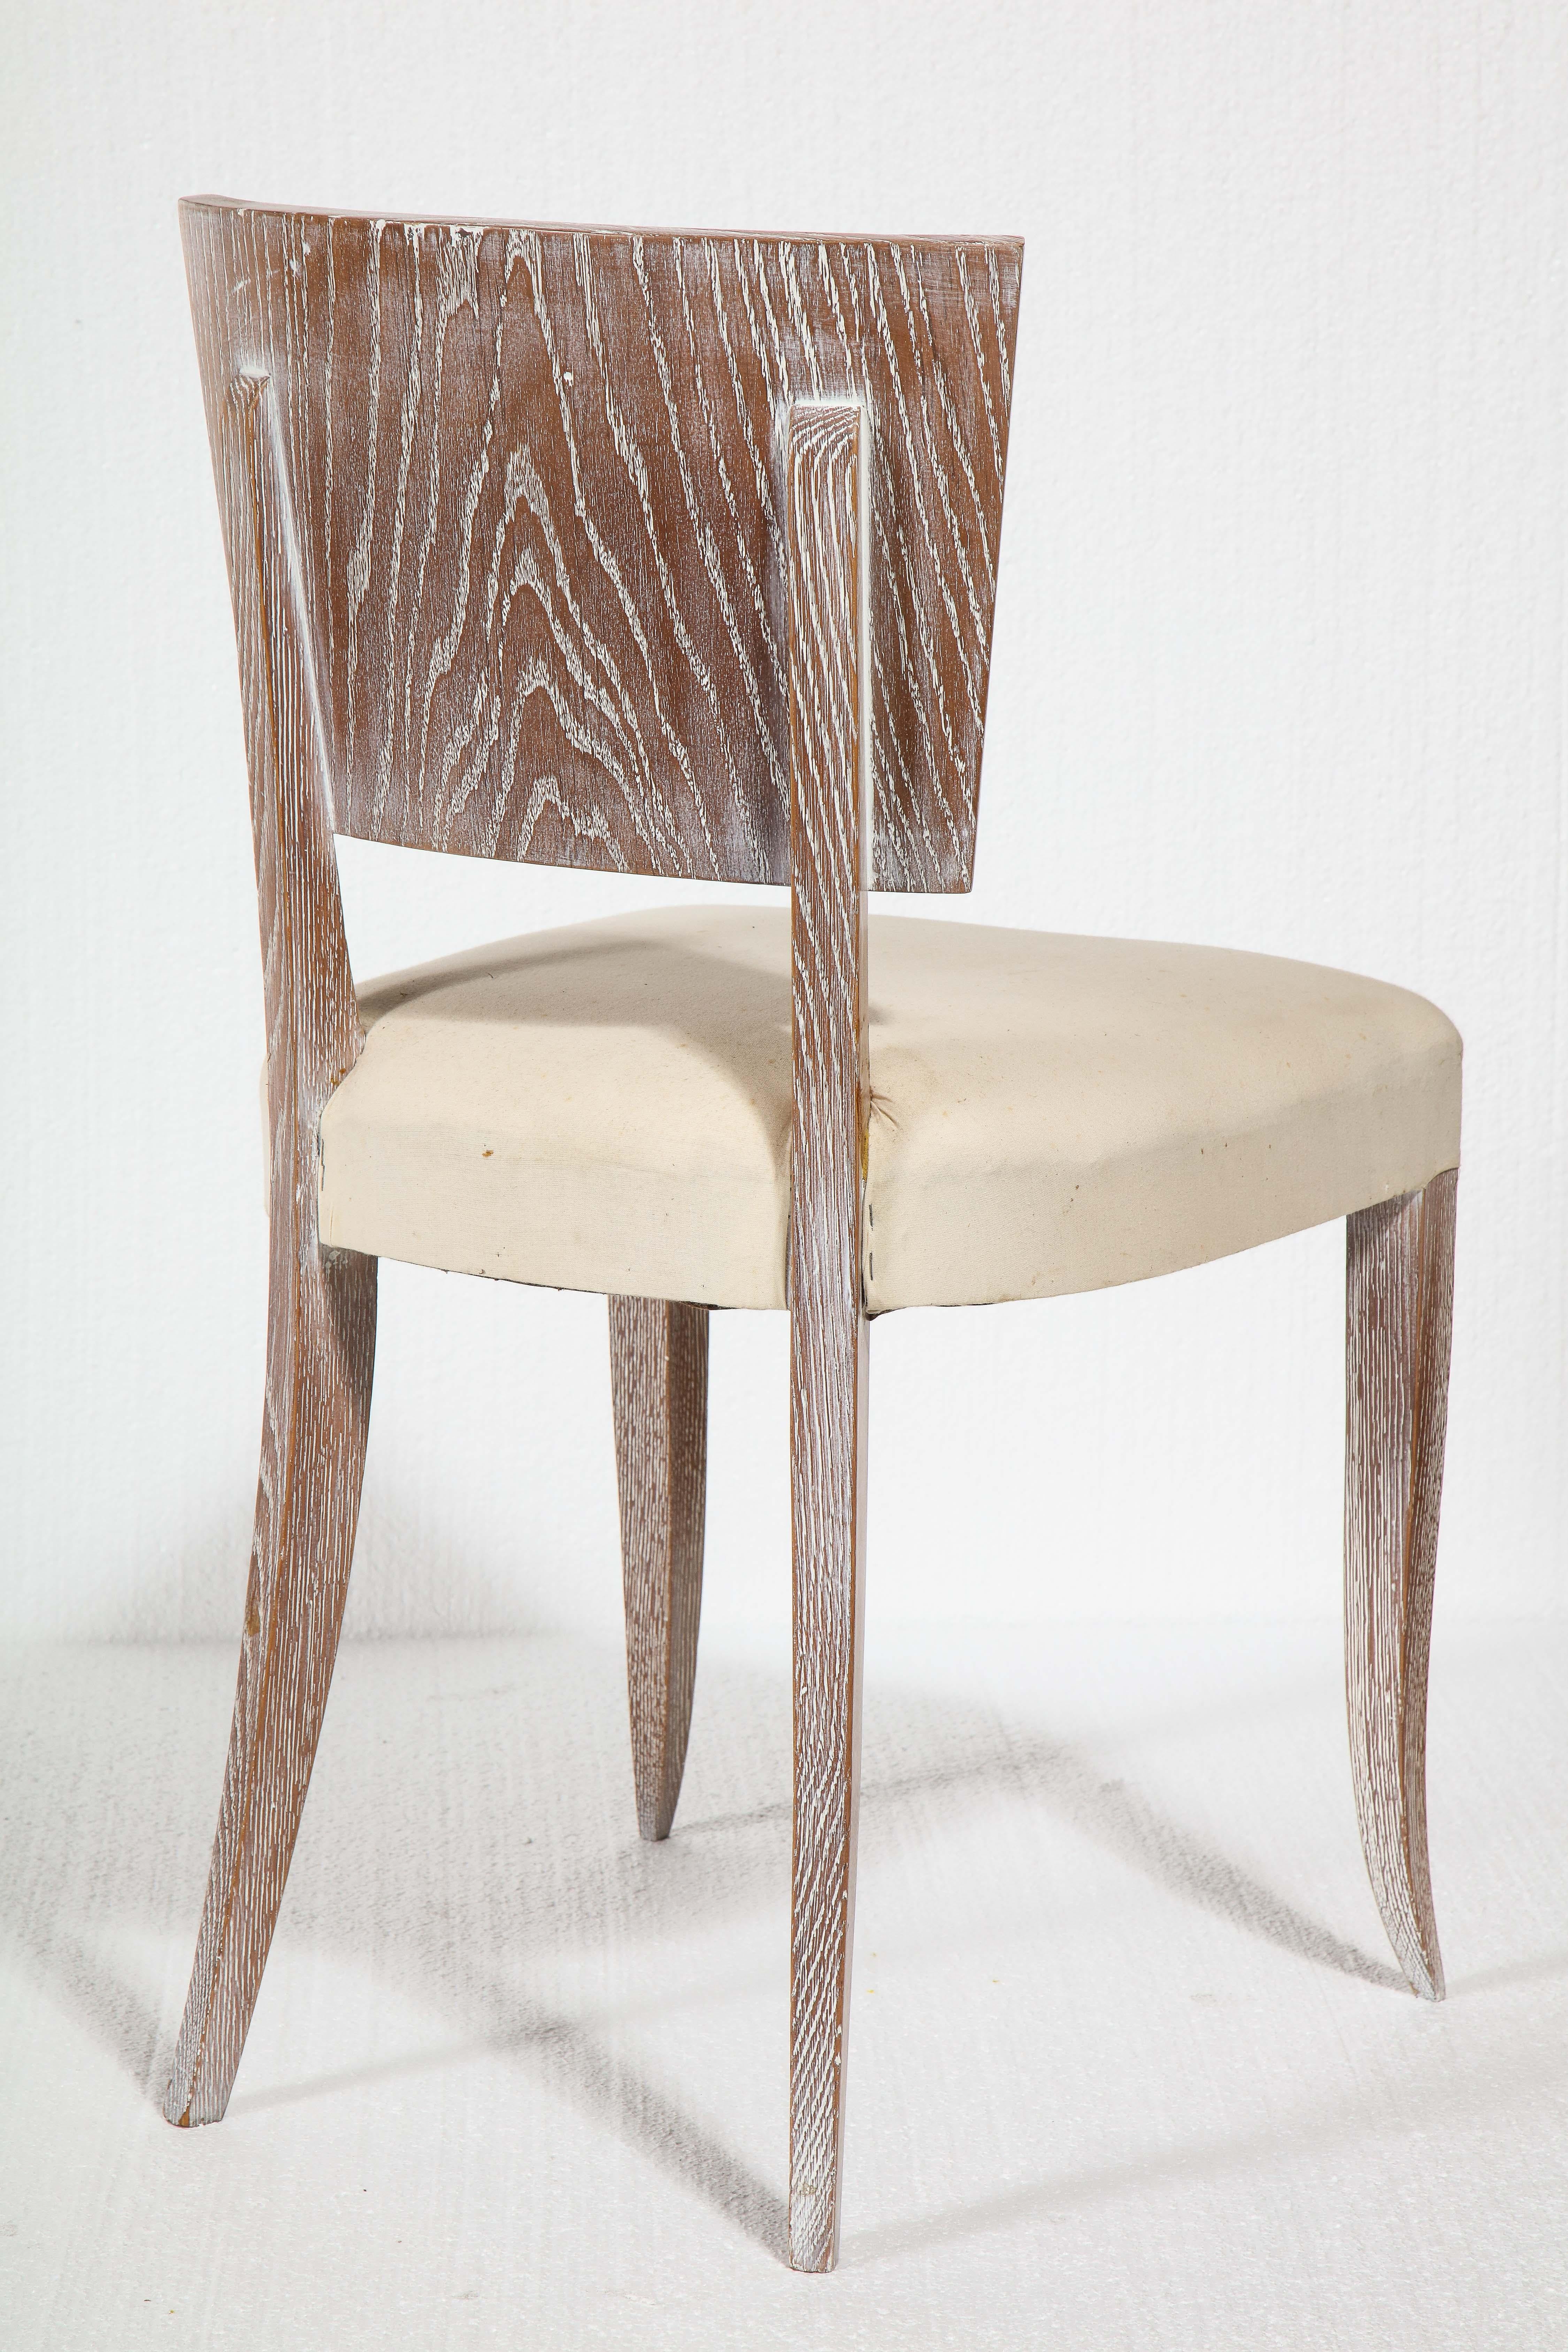 6 French Art Deco Cerused Oak White Dining Chairs, 1930s For Sale 3